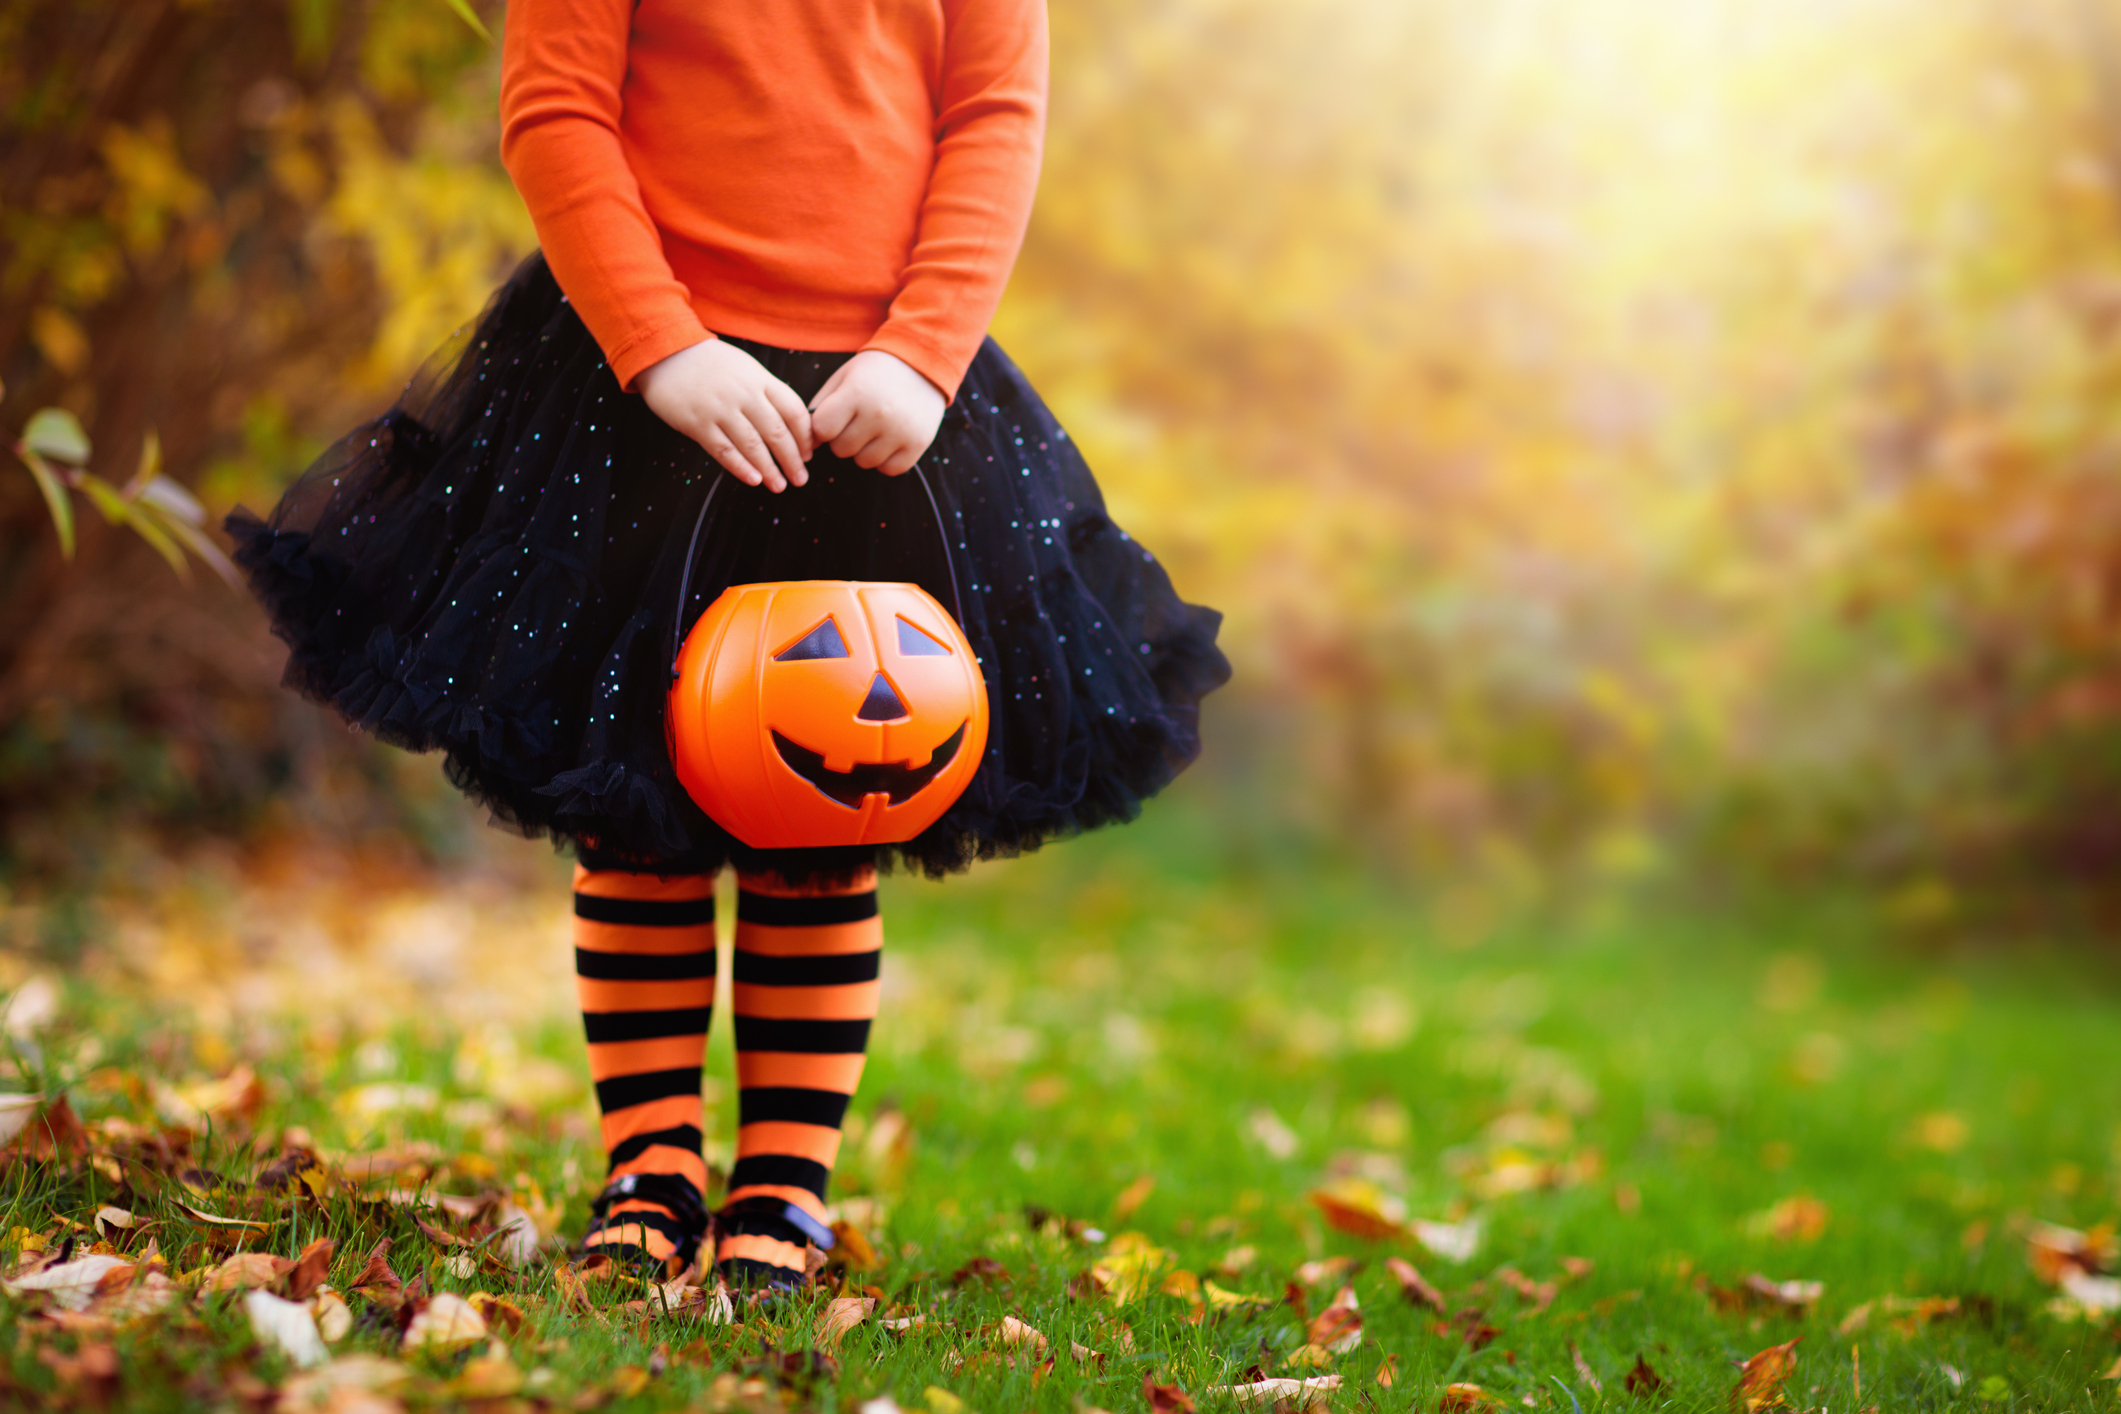 How to Enter Our Halloween Photo Contest 2021 | American Adoptions Blog